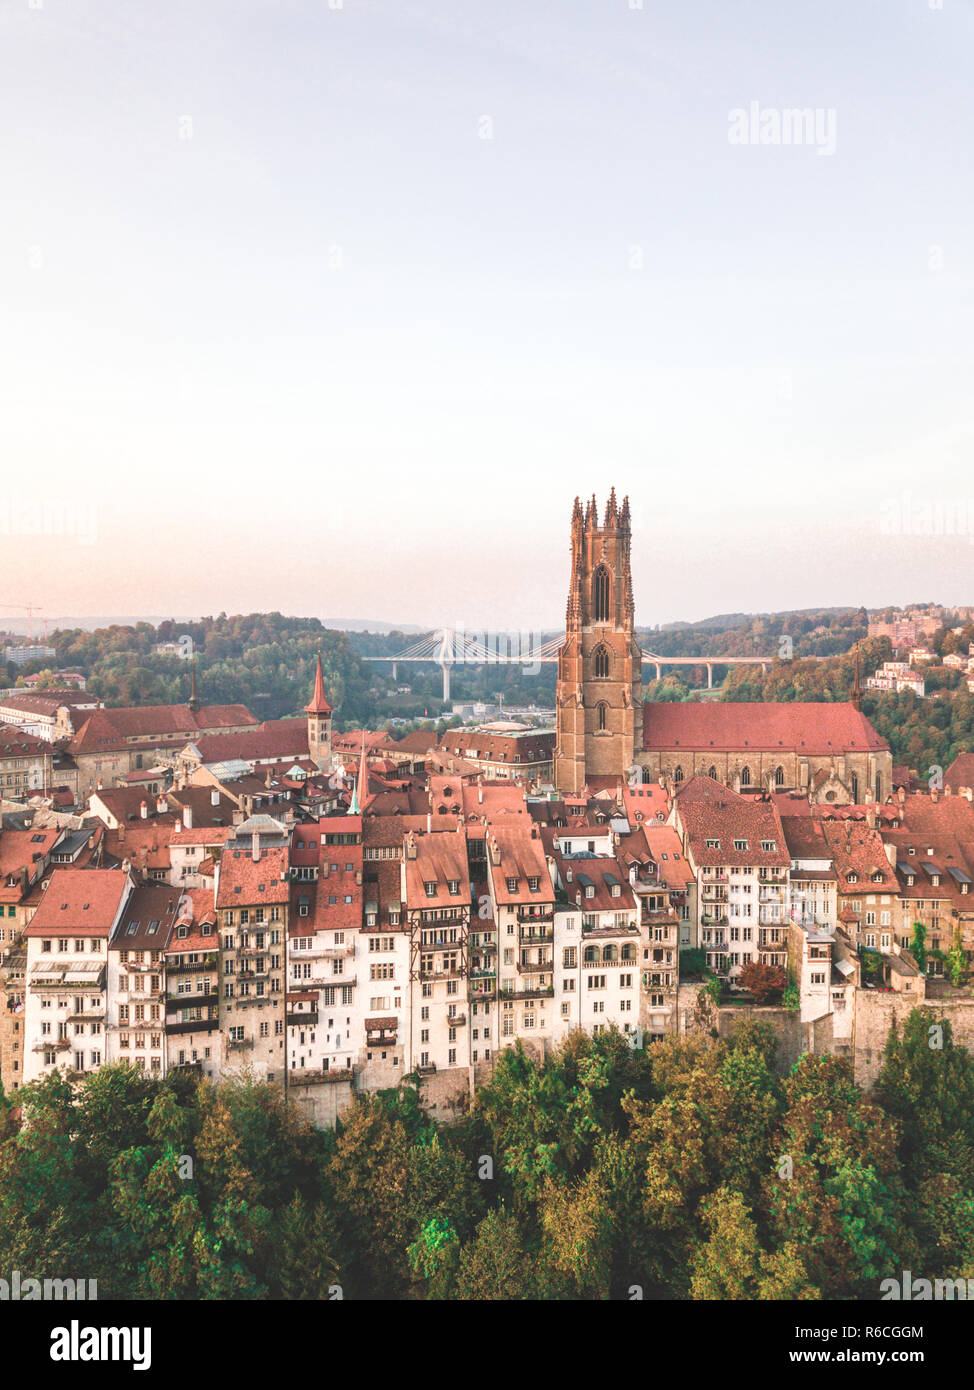 Fribourg in Switzerland. Bilingual city full of life and students. Stock Photo